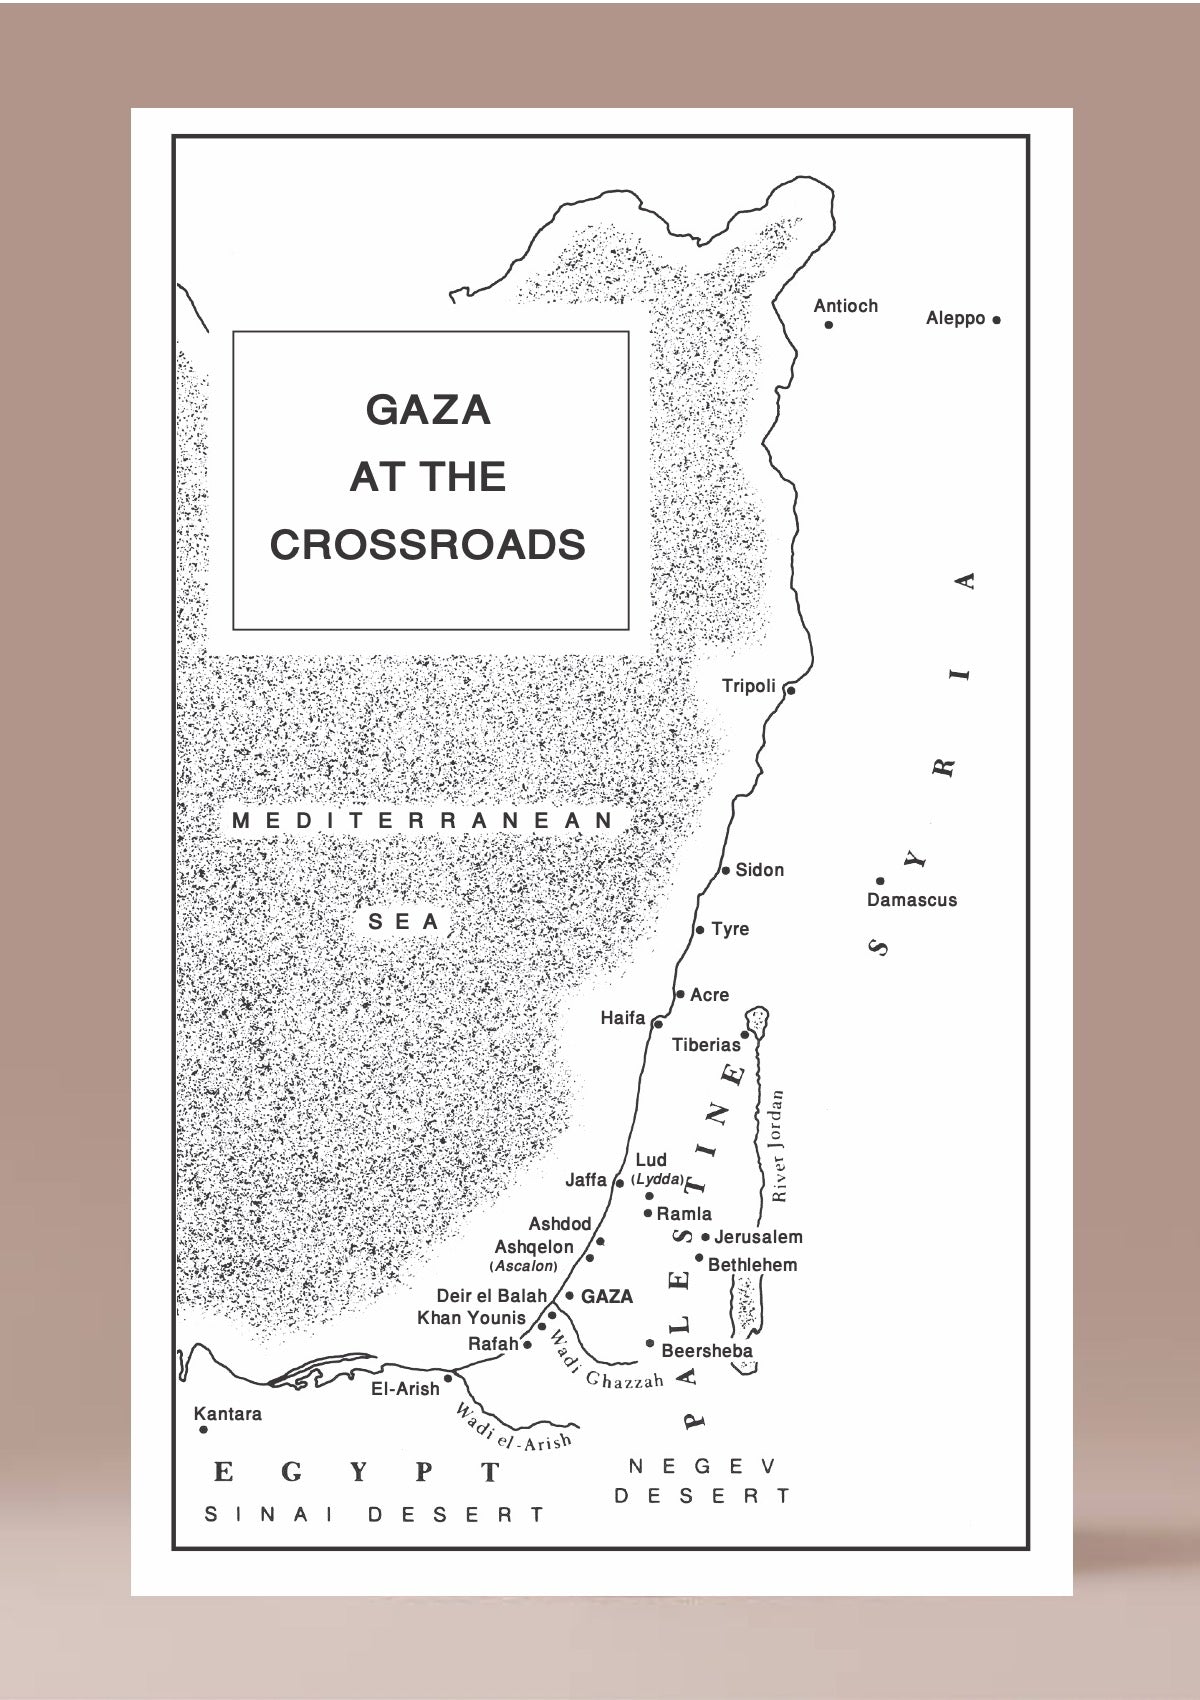 Life at the Crossroads: A History of Gaza